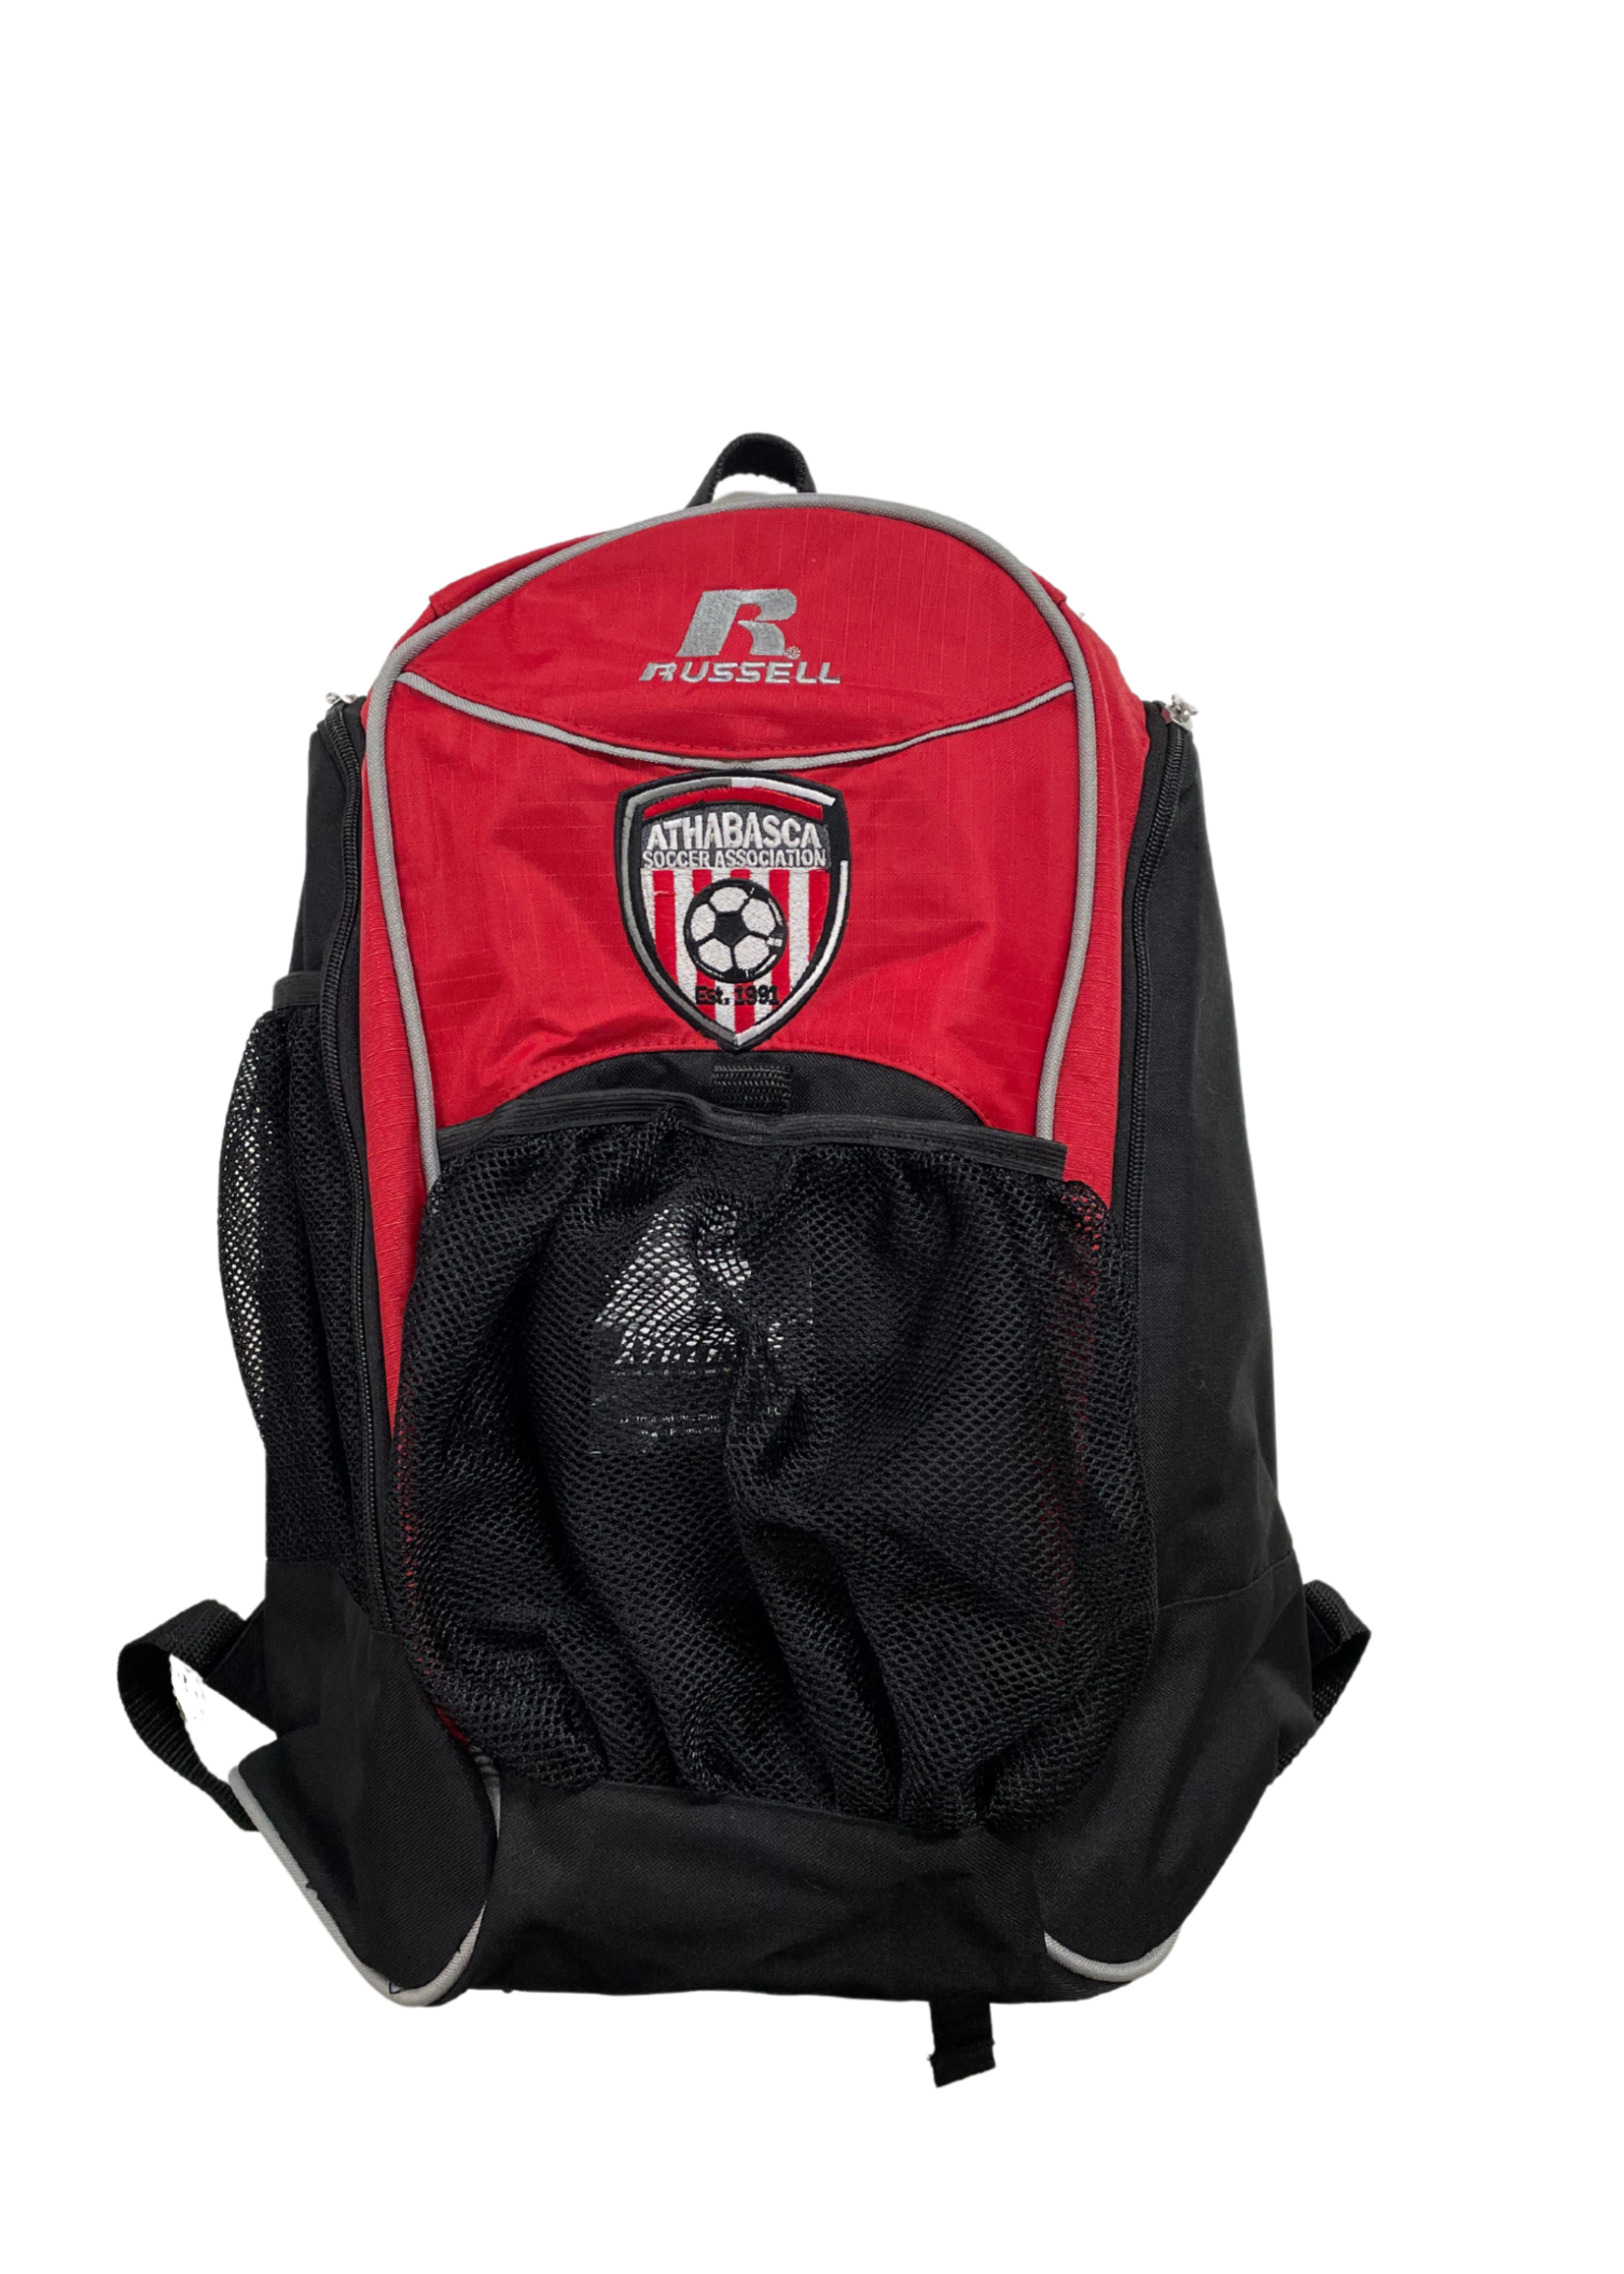 RUSSELL ATHABASCA SOCCER RUSSELL BACKPACK LOGO RED